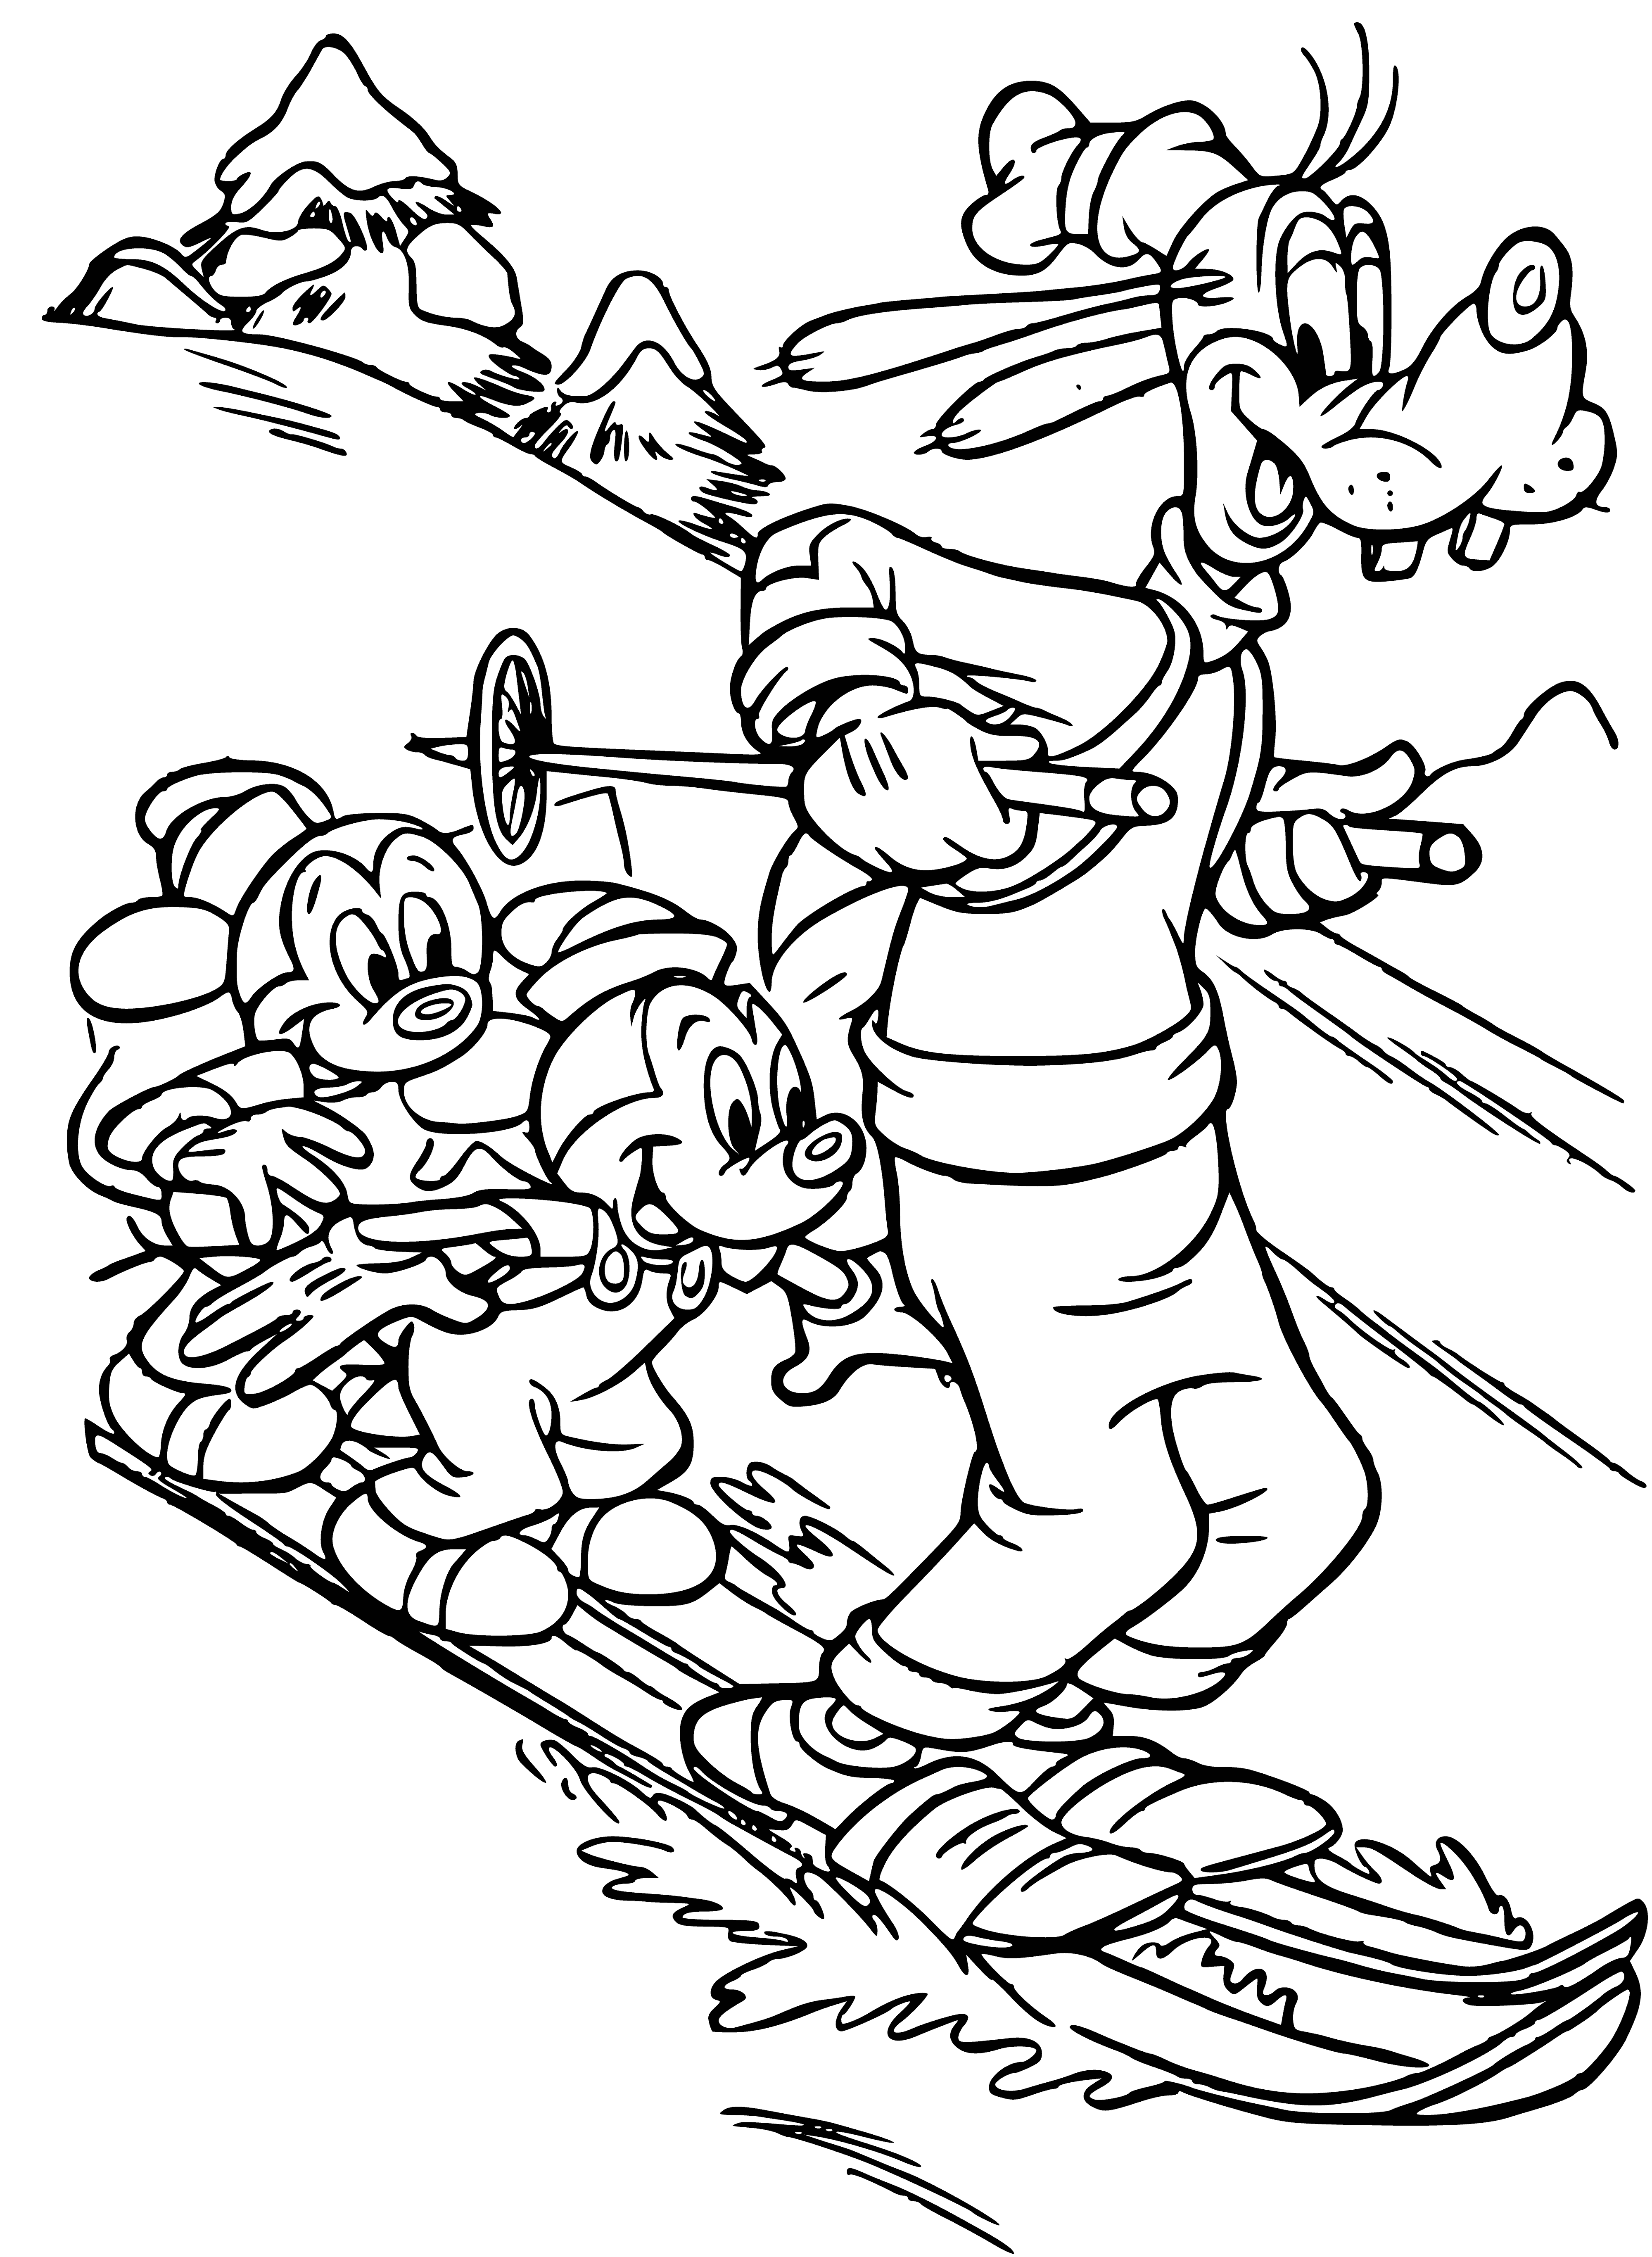 Goofy and Mouses coloring page